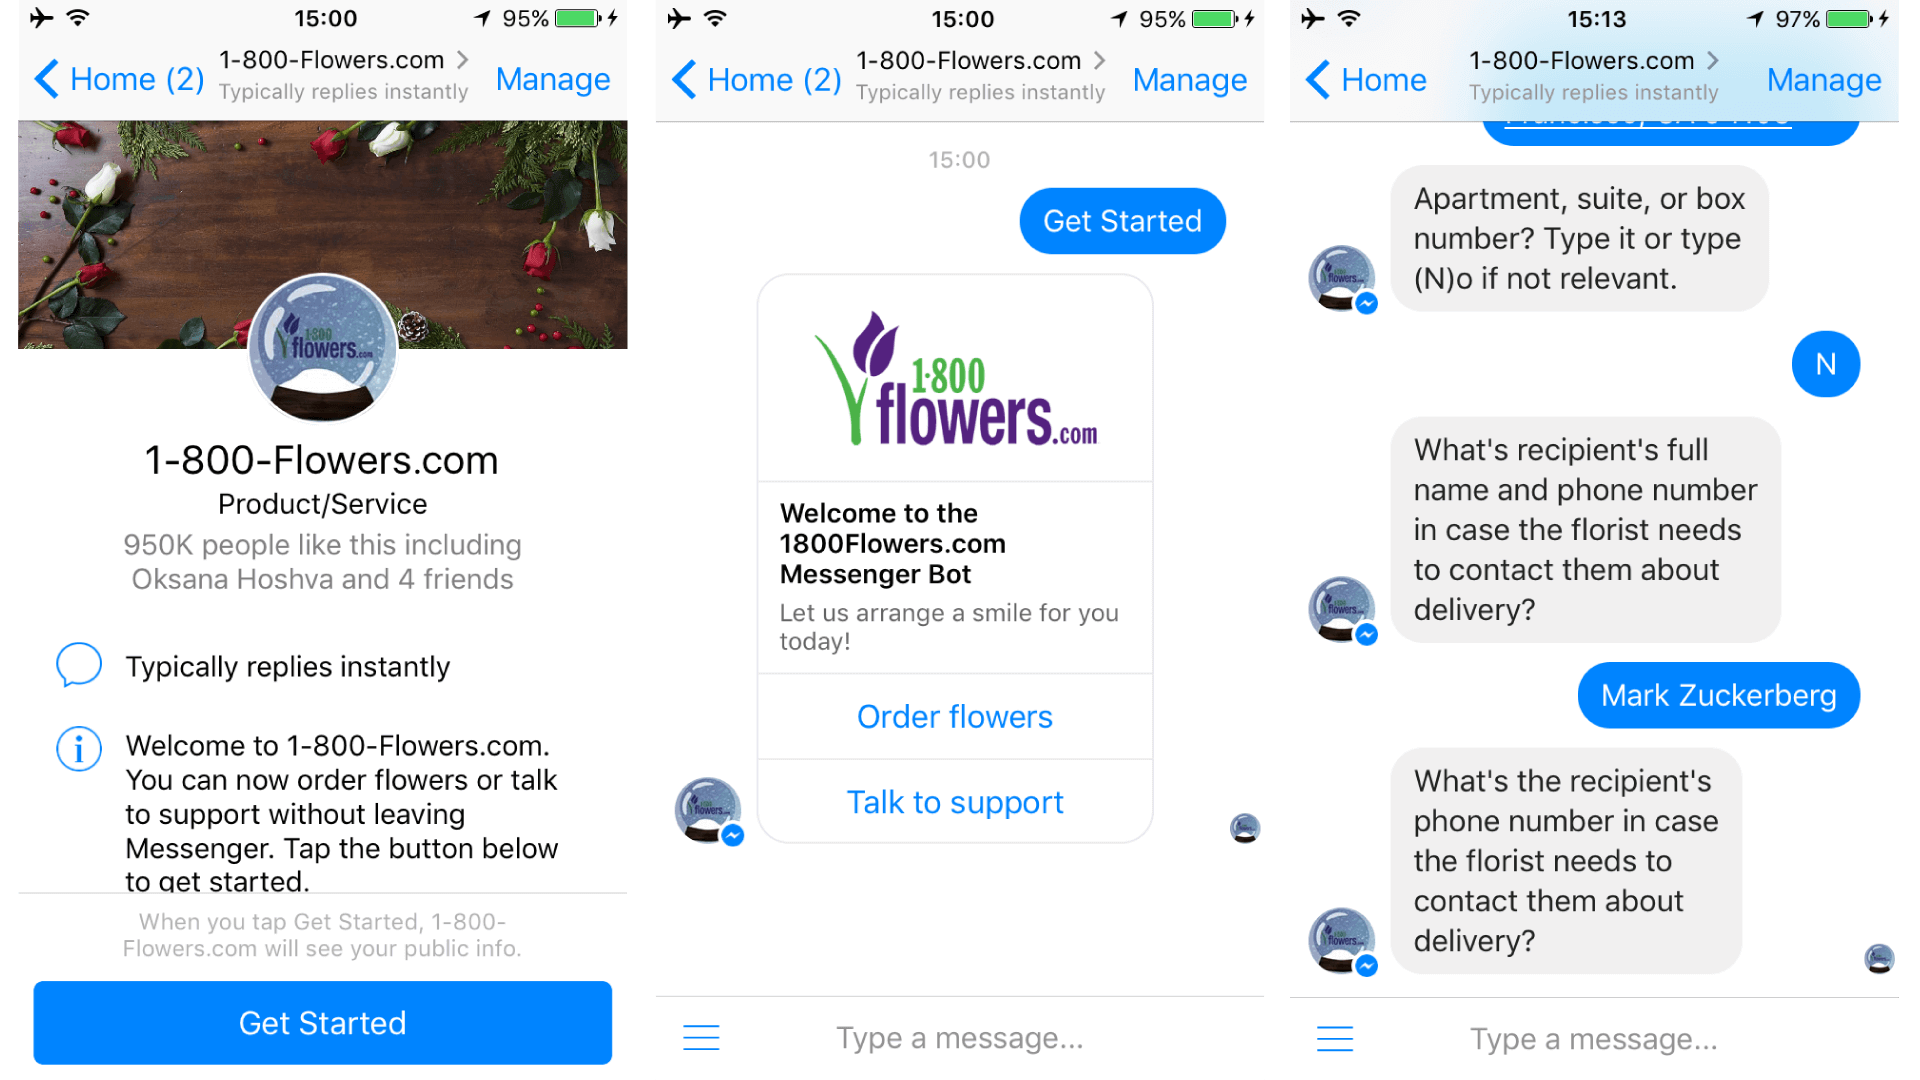 Interacting with 1-800-Flowers.com chatbot